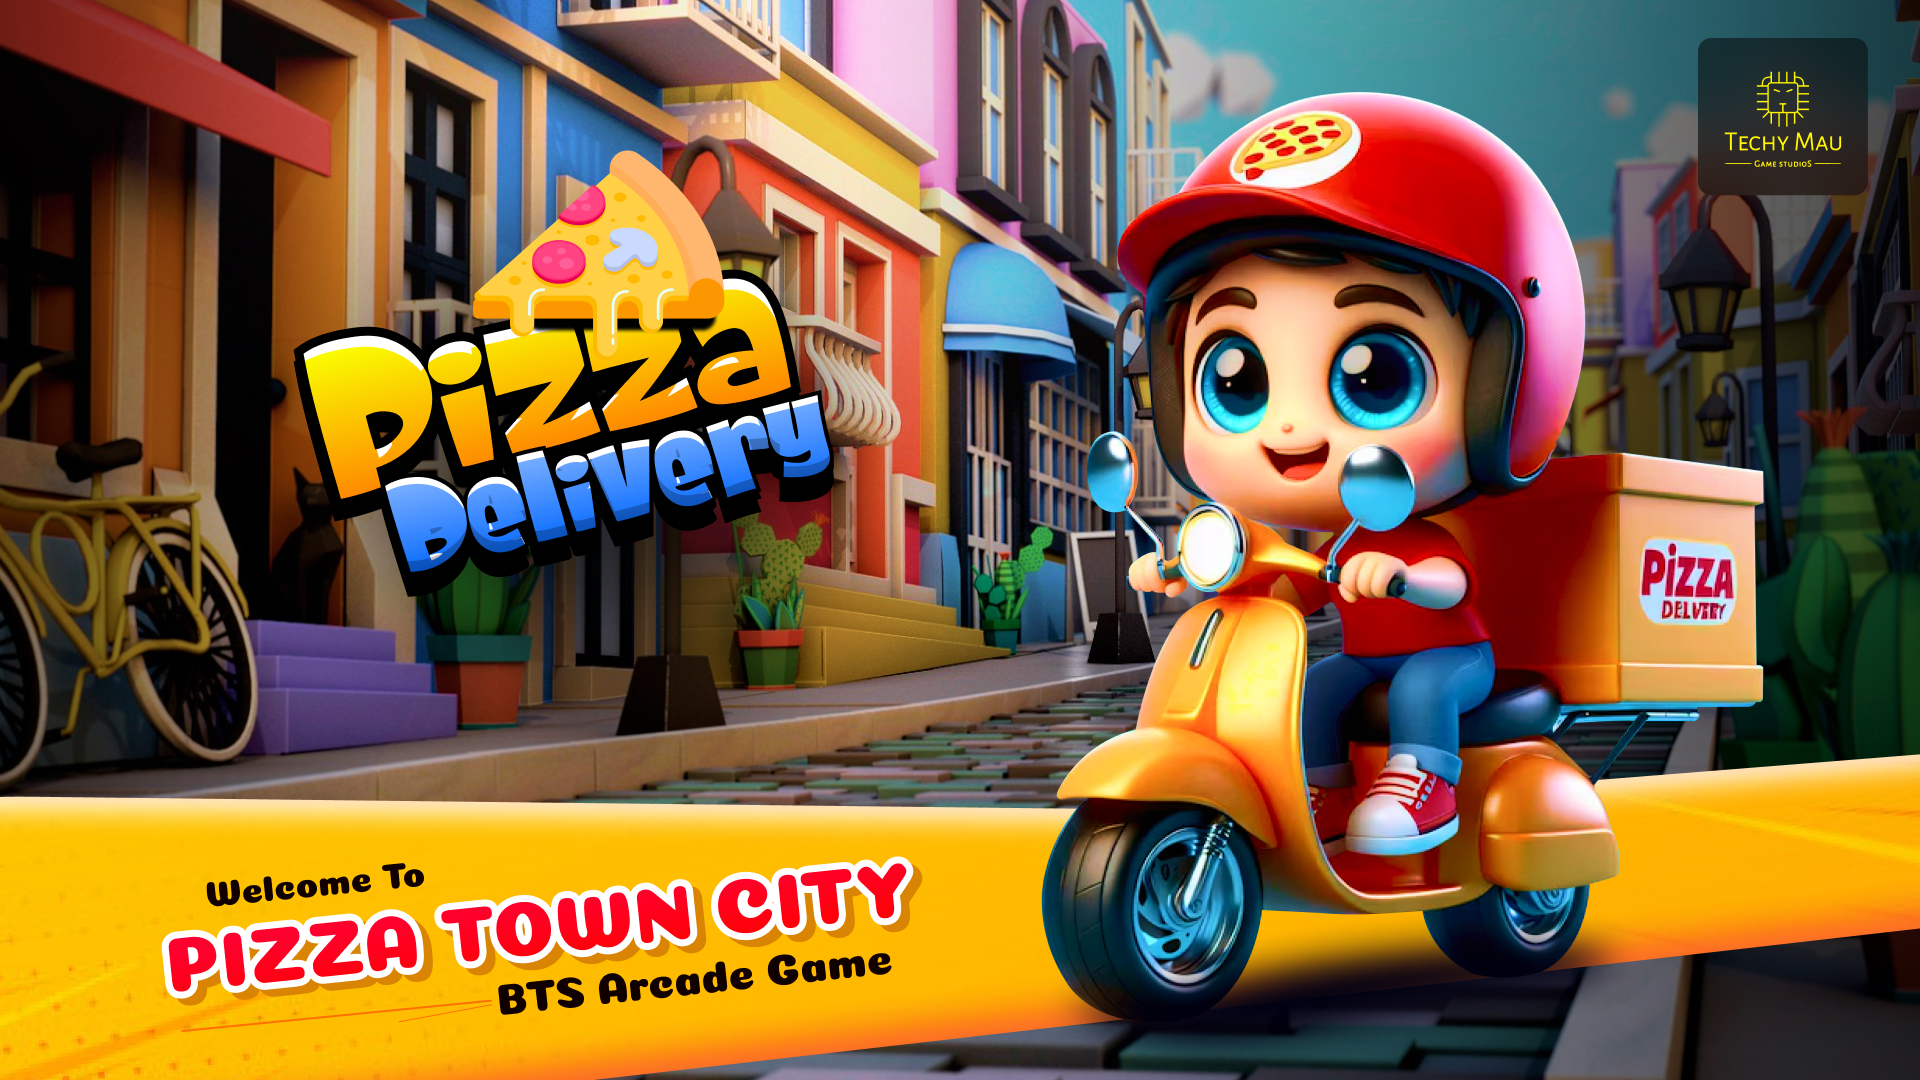 Behind The Scene Of Pizza Delivery Game